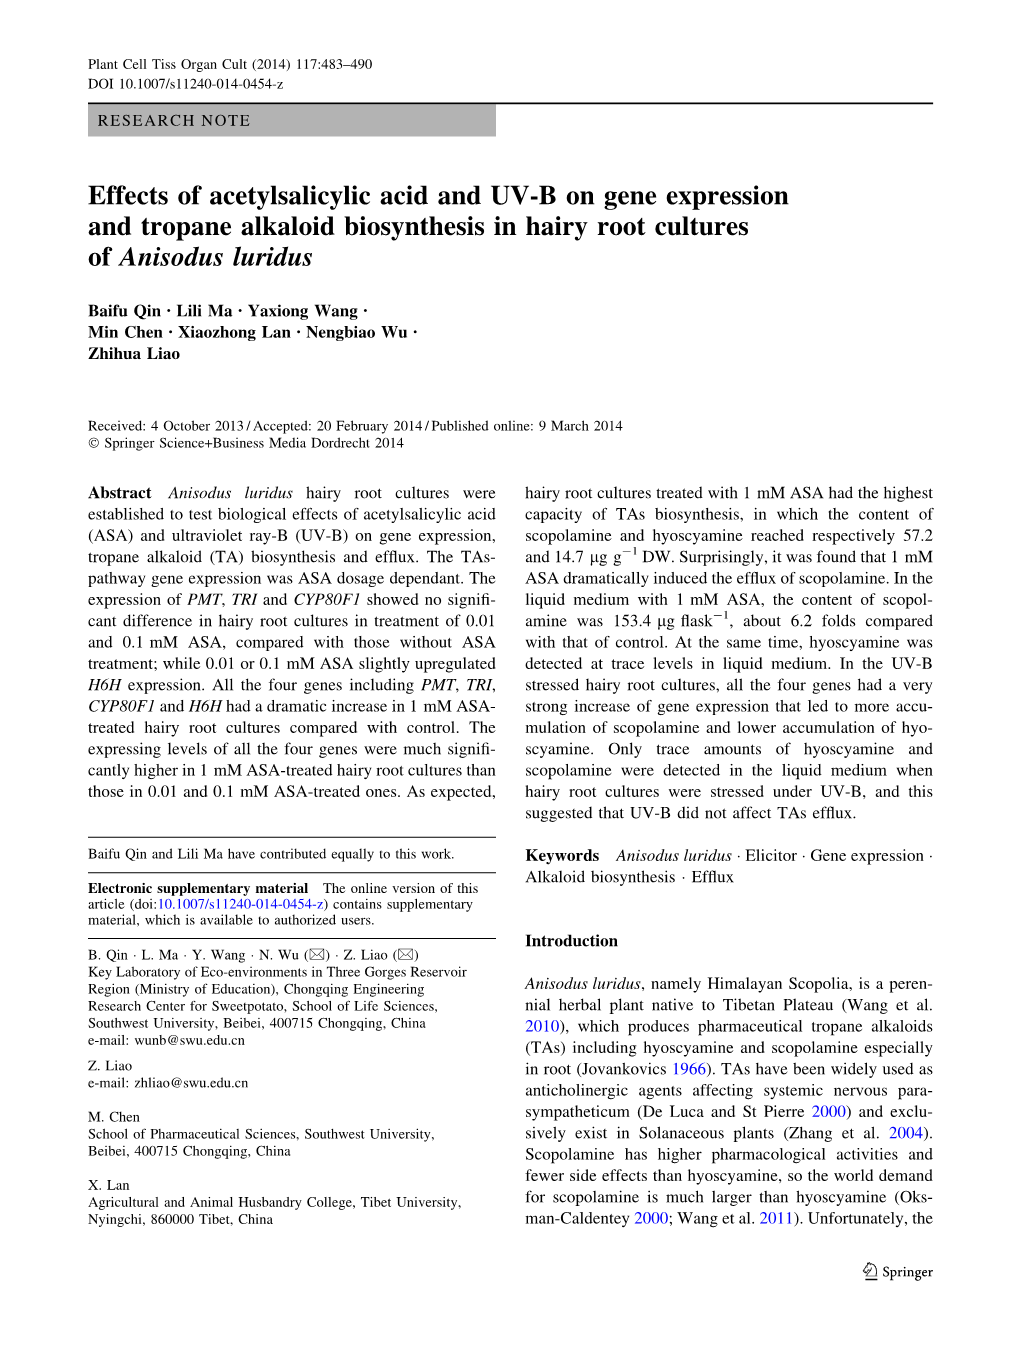 Effects of Acetylsalicylic Acid and UV-B on Gene Expression and Tropane Alkaloid Biosynthesis in Hairy Root Cultures of Anisodus Luridus